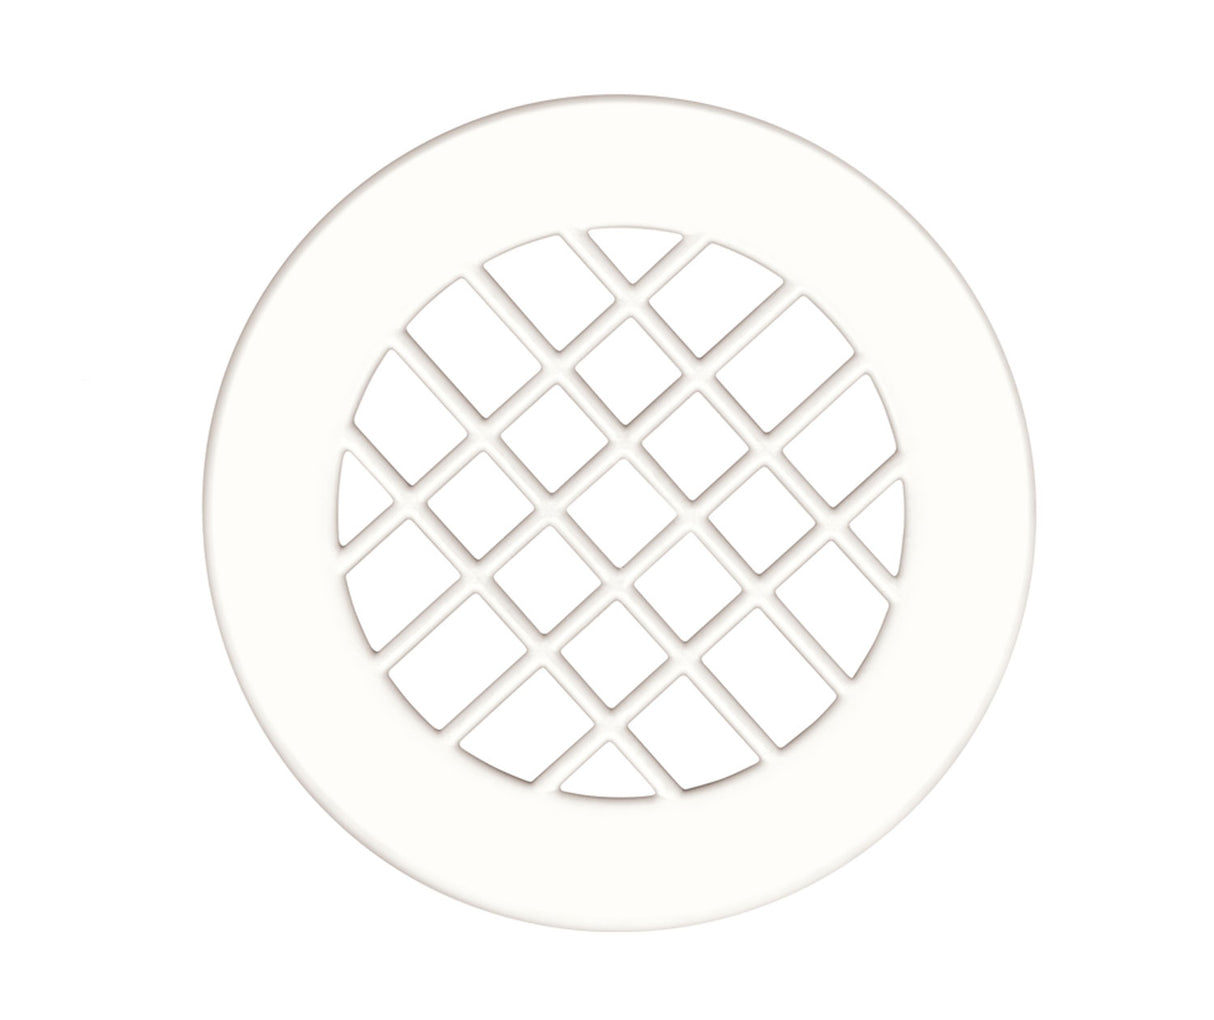 Swanstone DC-MD Drain Cover in White DC20000ID.010